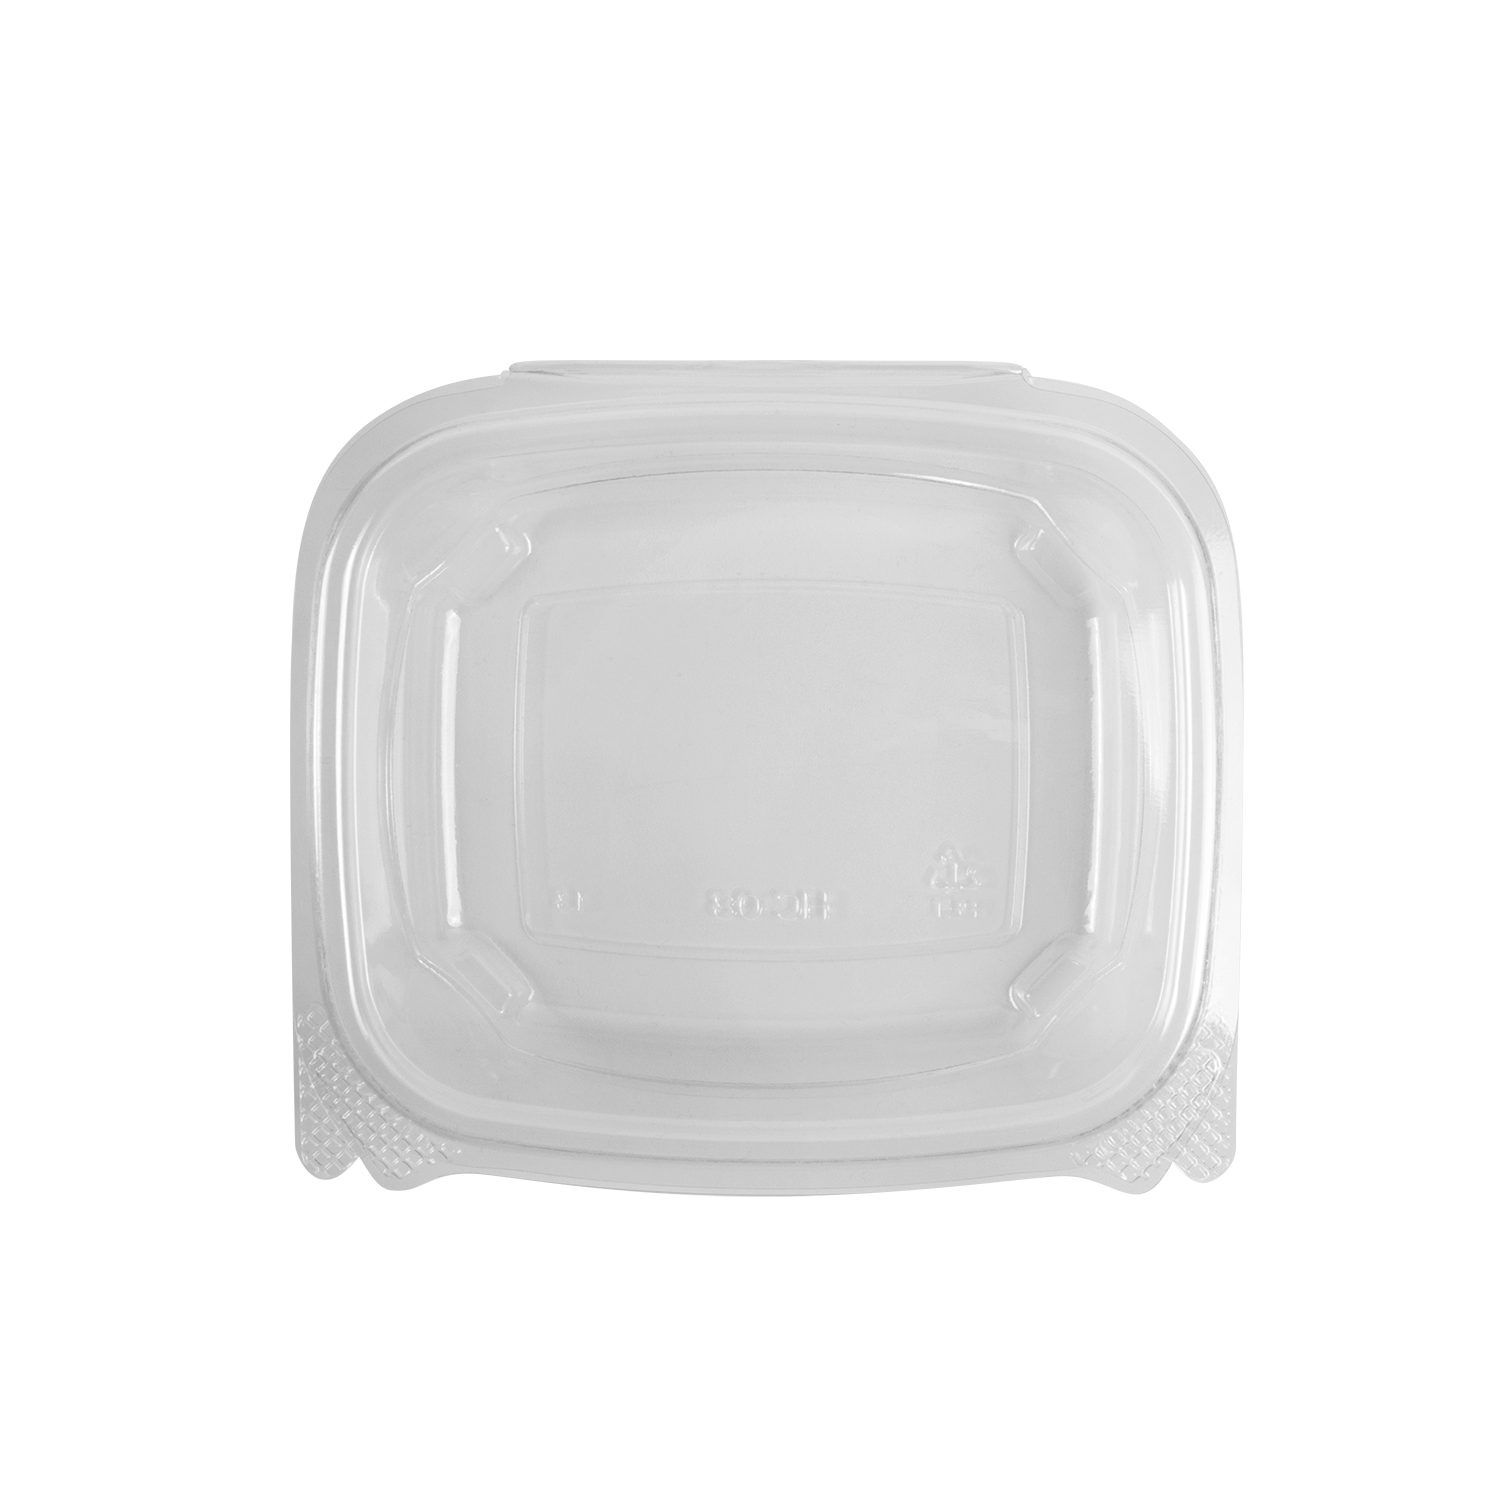 AD08 CPC 8 oz Clear Hinged Flat Lid Deli Container, Case of 200, 200 -  Fry's Food Stores